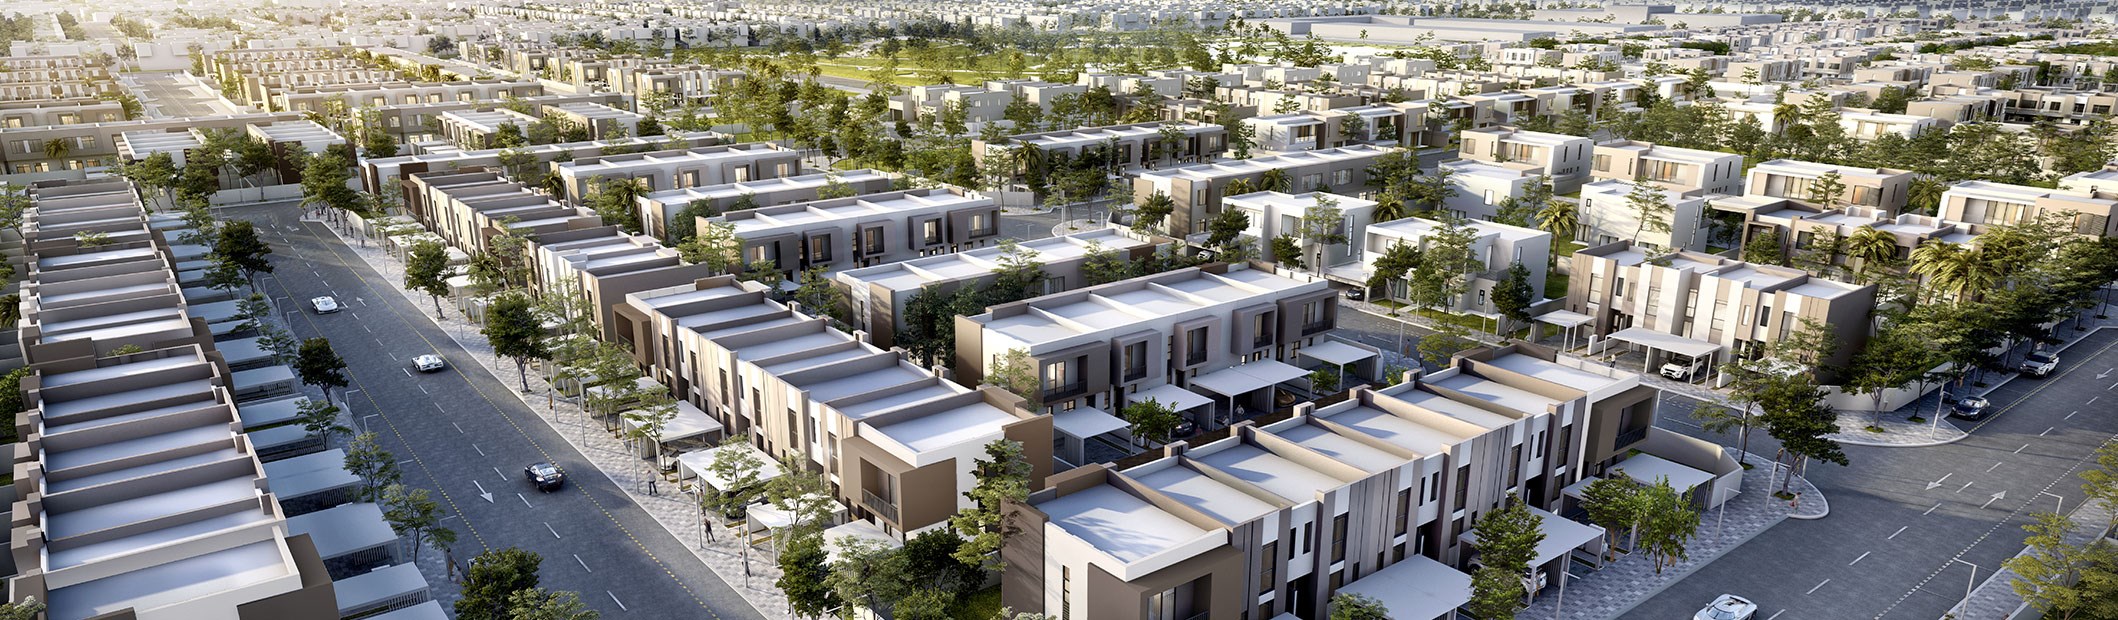 Arada announces three construction contracts to build almost 800 homes in landmark Sharjah projects